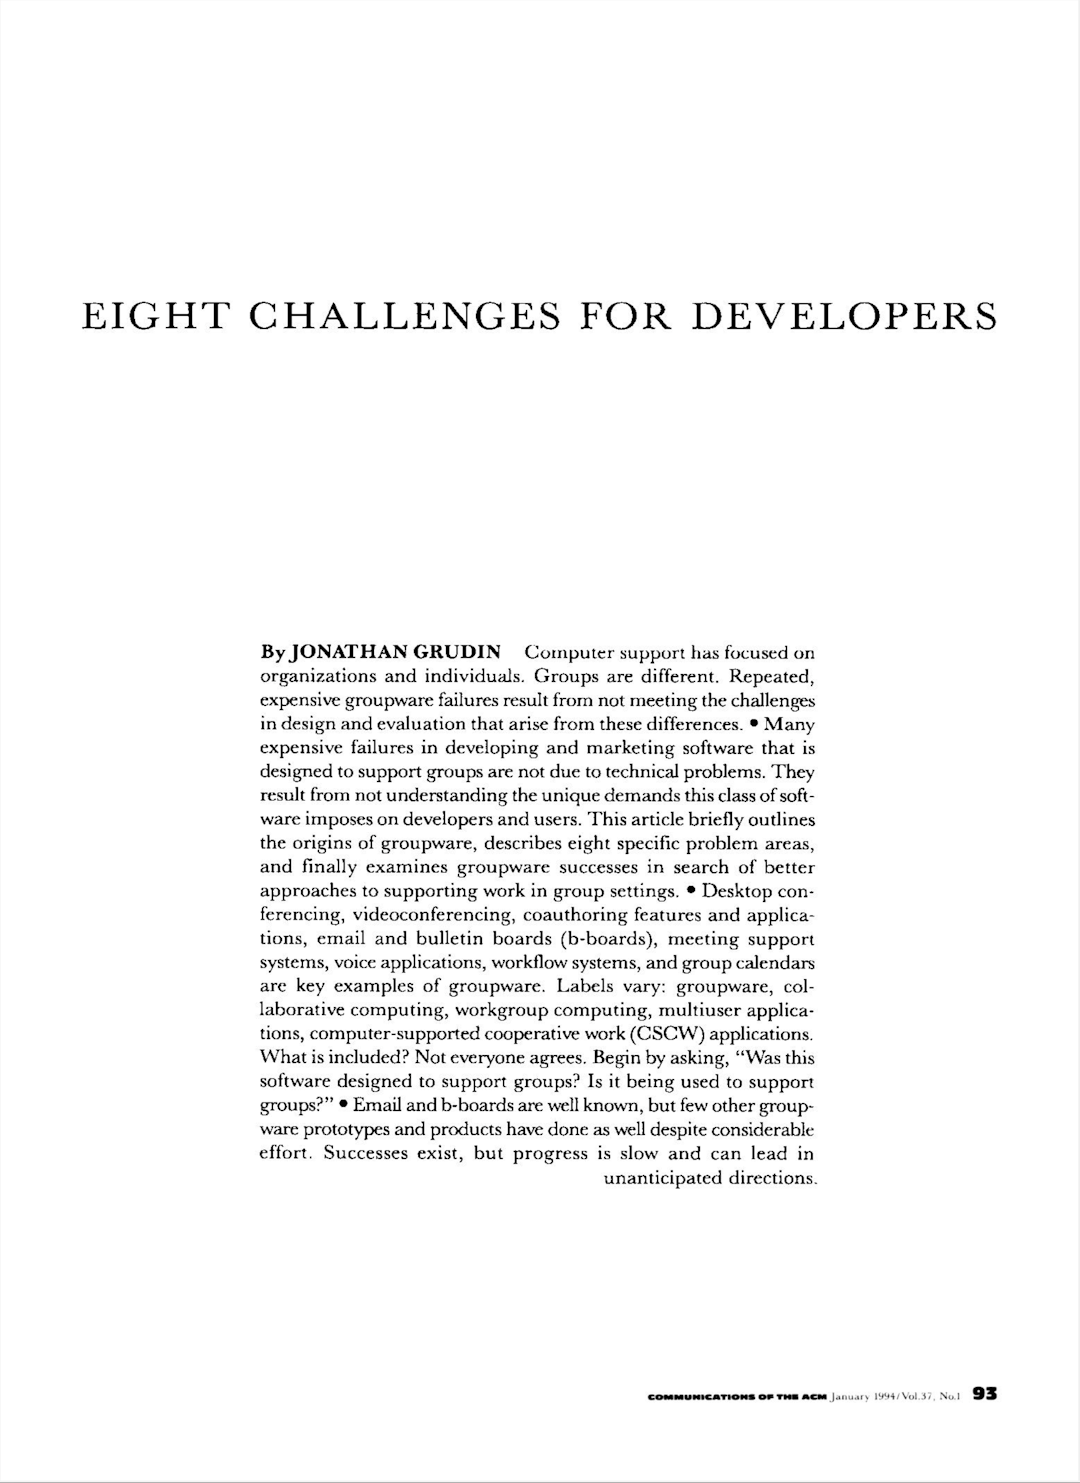 Groupware and Social Dynamics: Eight Challenges for Developers